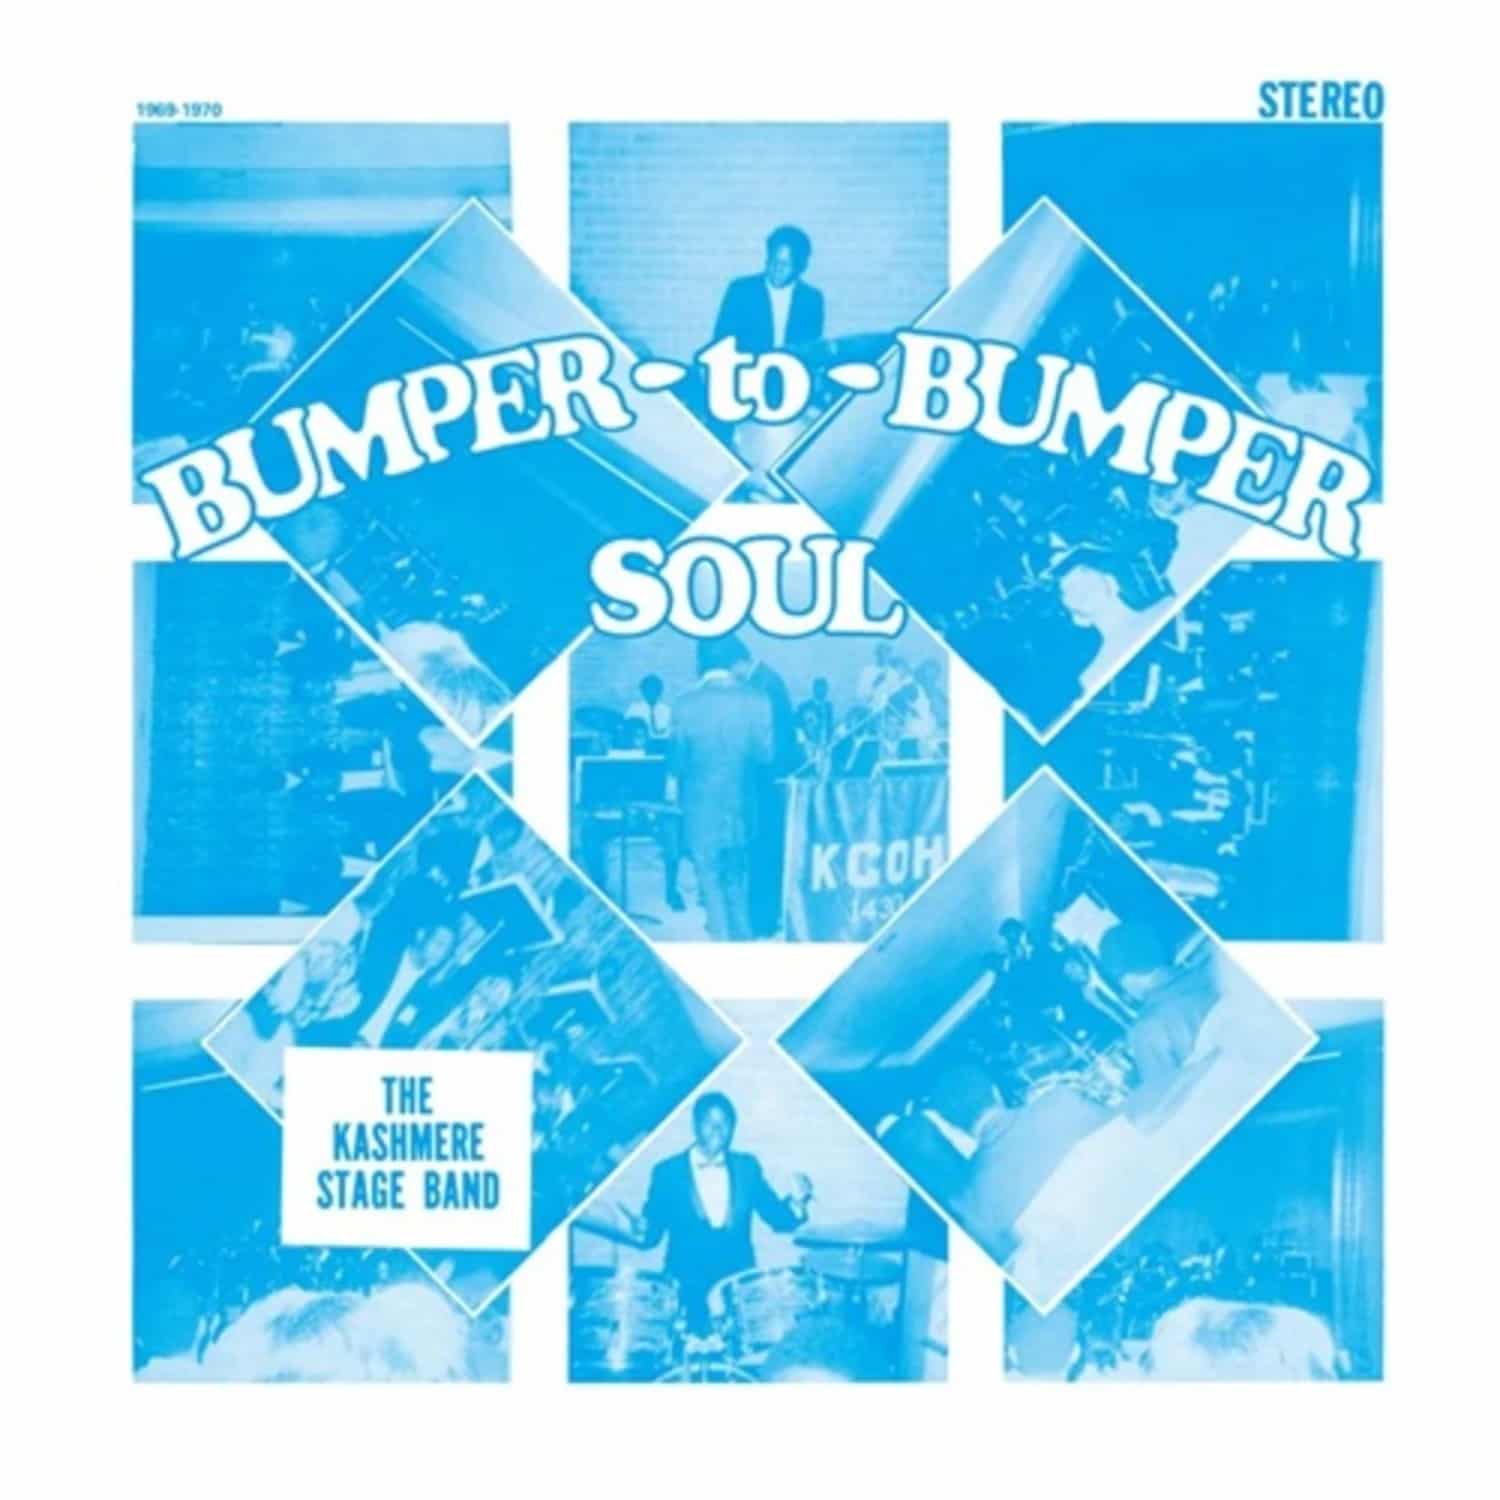 Kashmere Stage Band - BUMPER TO BUMPER SOUL 